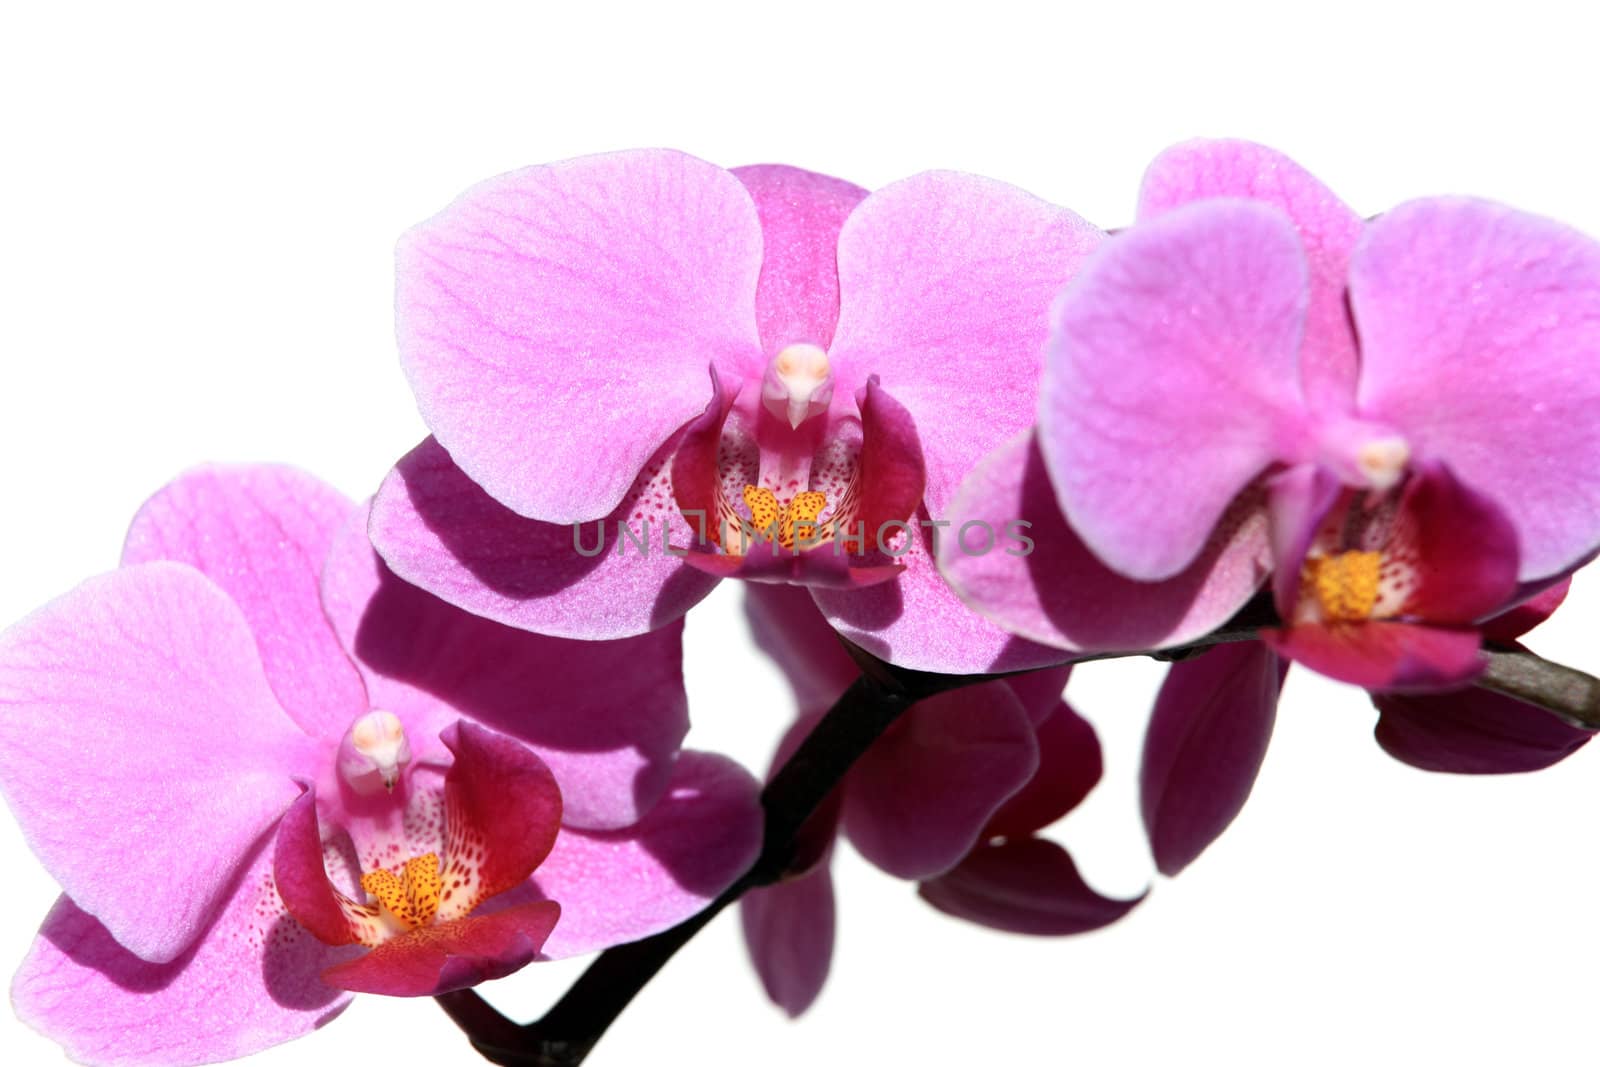 Violet Orchid Phalaenopsis by monner